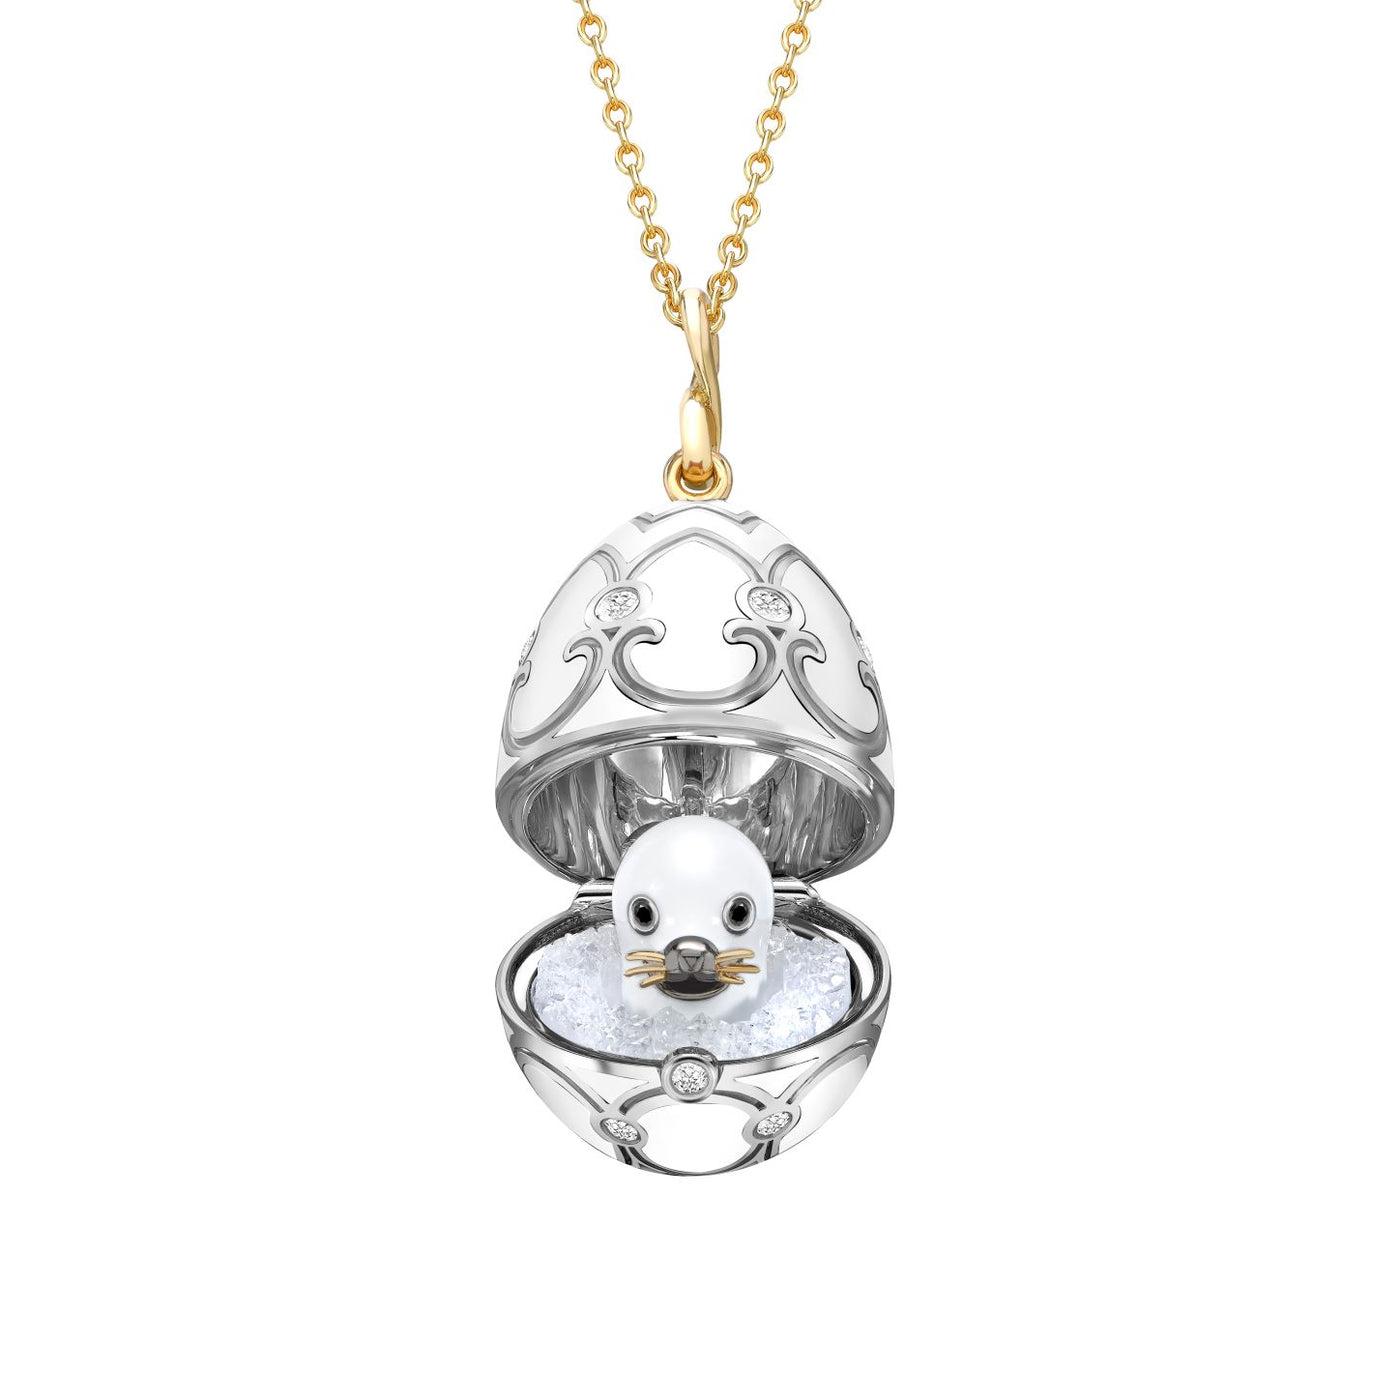 Fabergé Heritage Yellow and White Gold Diamond and White Enamel Seal Pup Surprise Locket